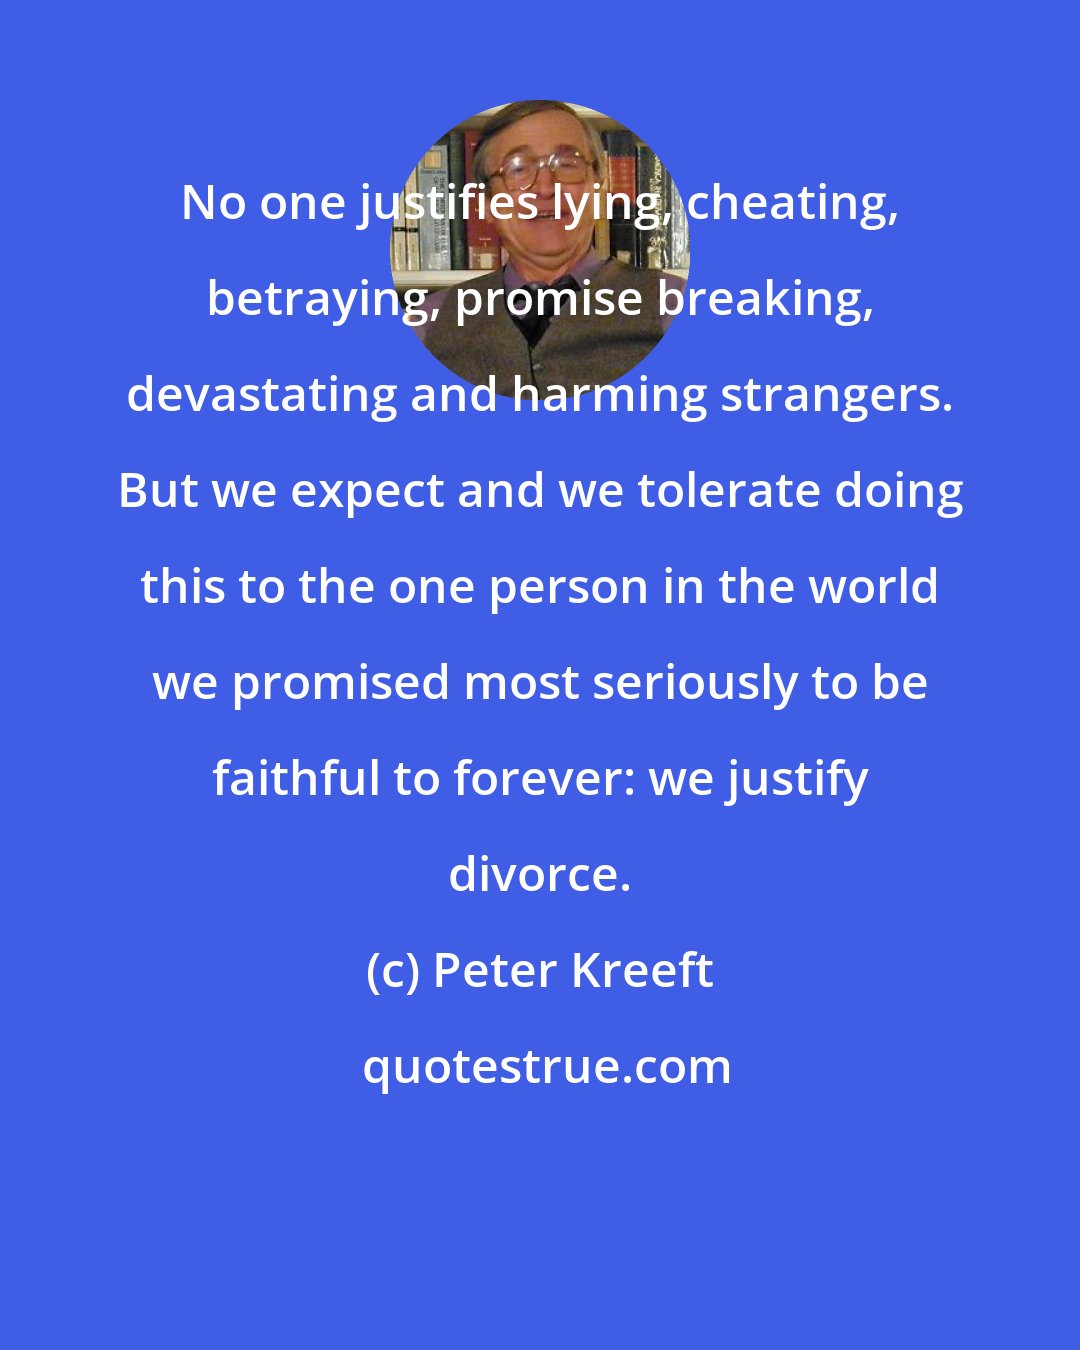 Peter Kreeft: No one justifies lying, cheating, betraying, promise breaking, devastating and harming strangers. But we expect and we tolerate doing this to the one person in the world we promised most seriously to be faithful to forever: we justify divorce.